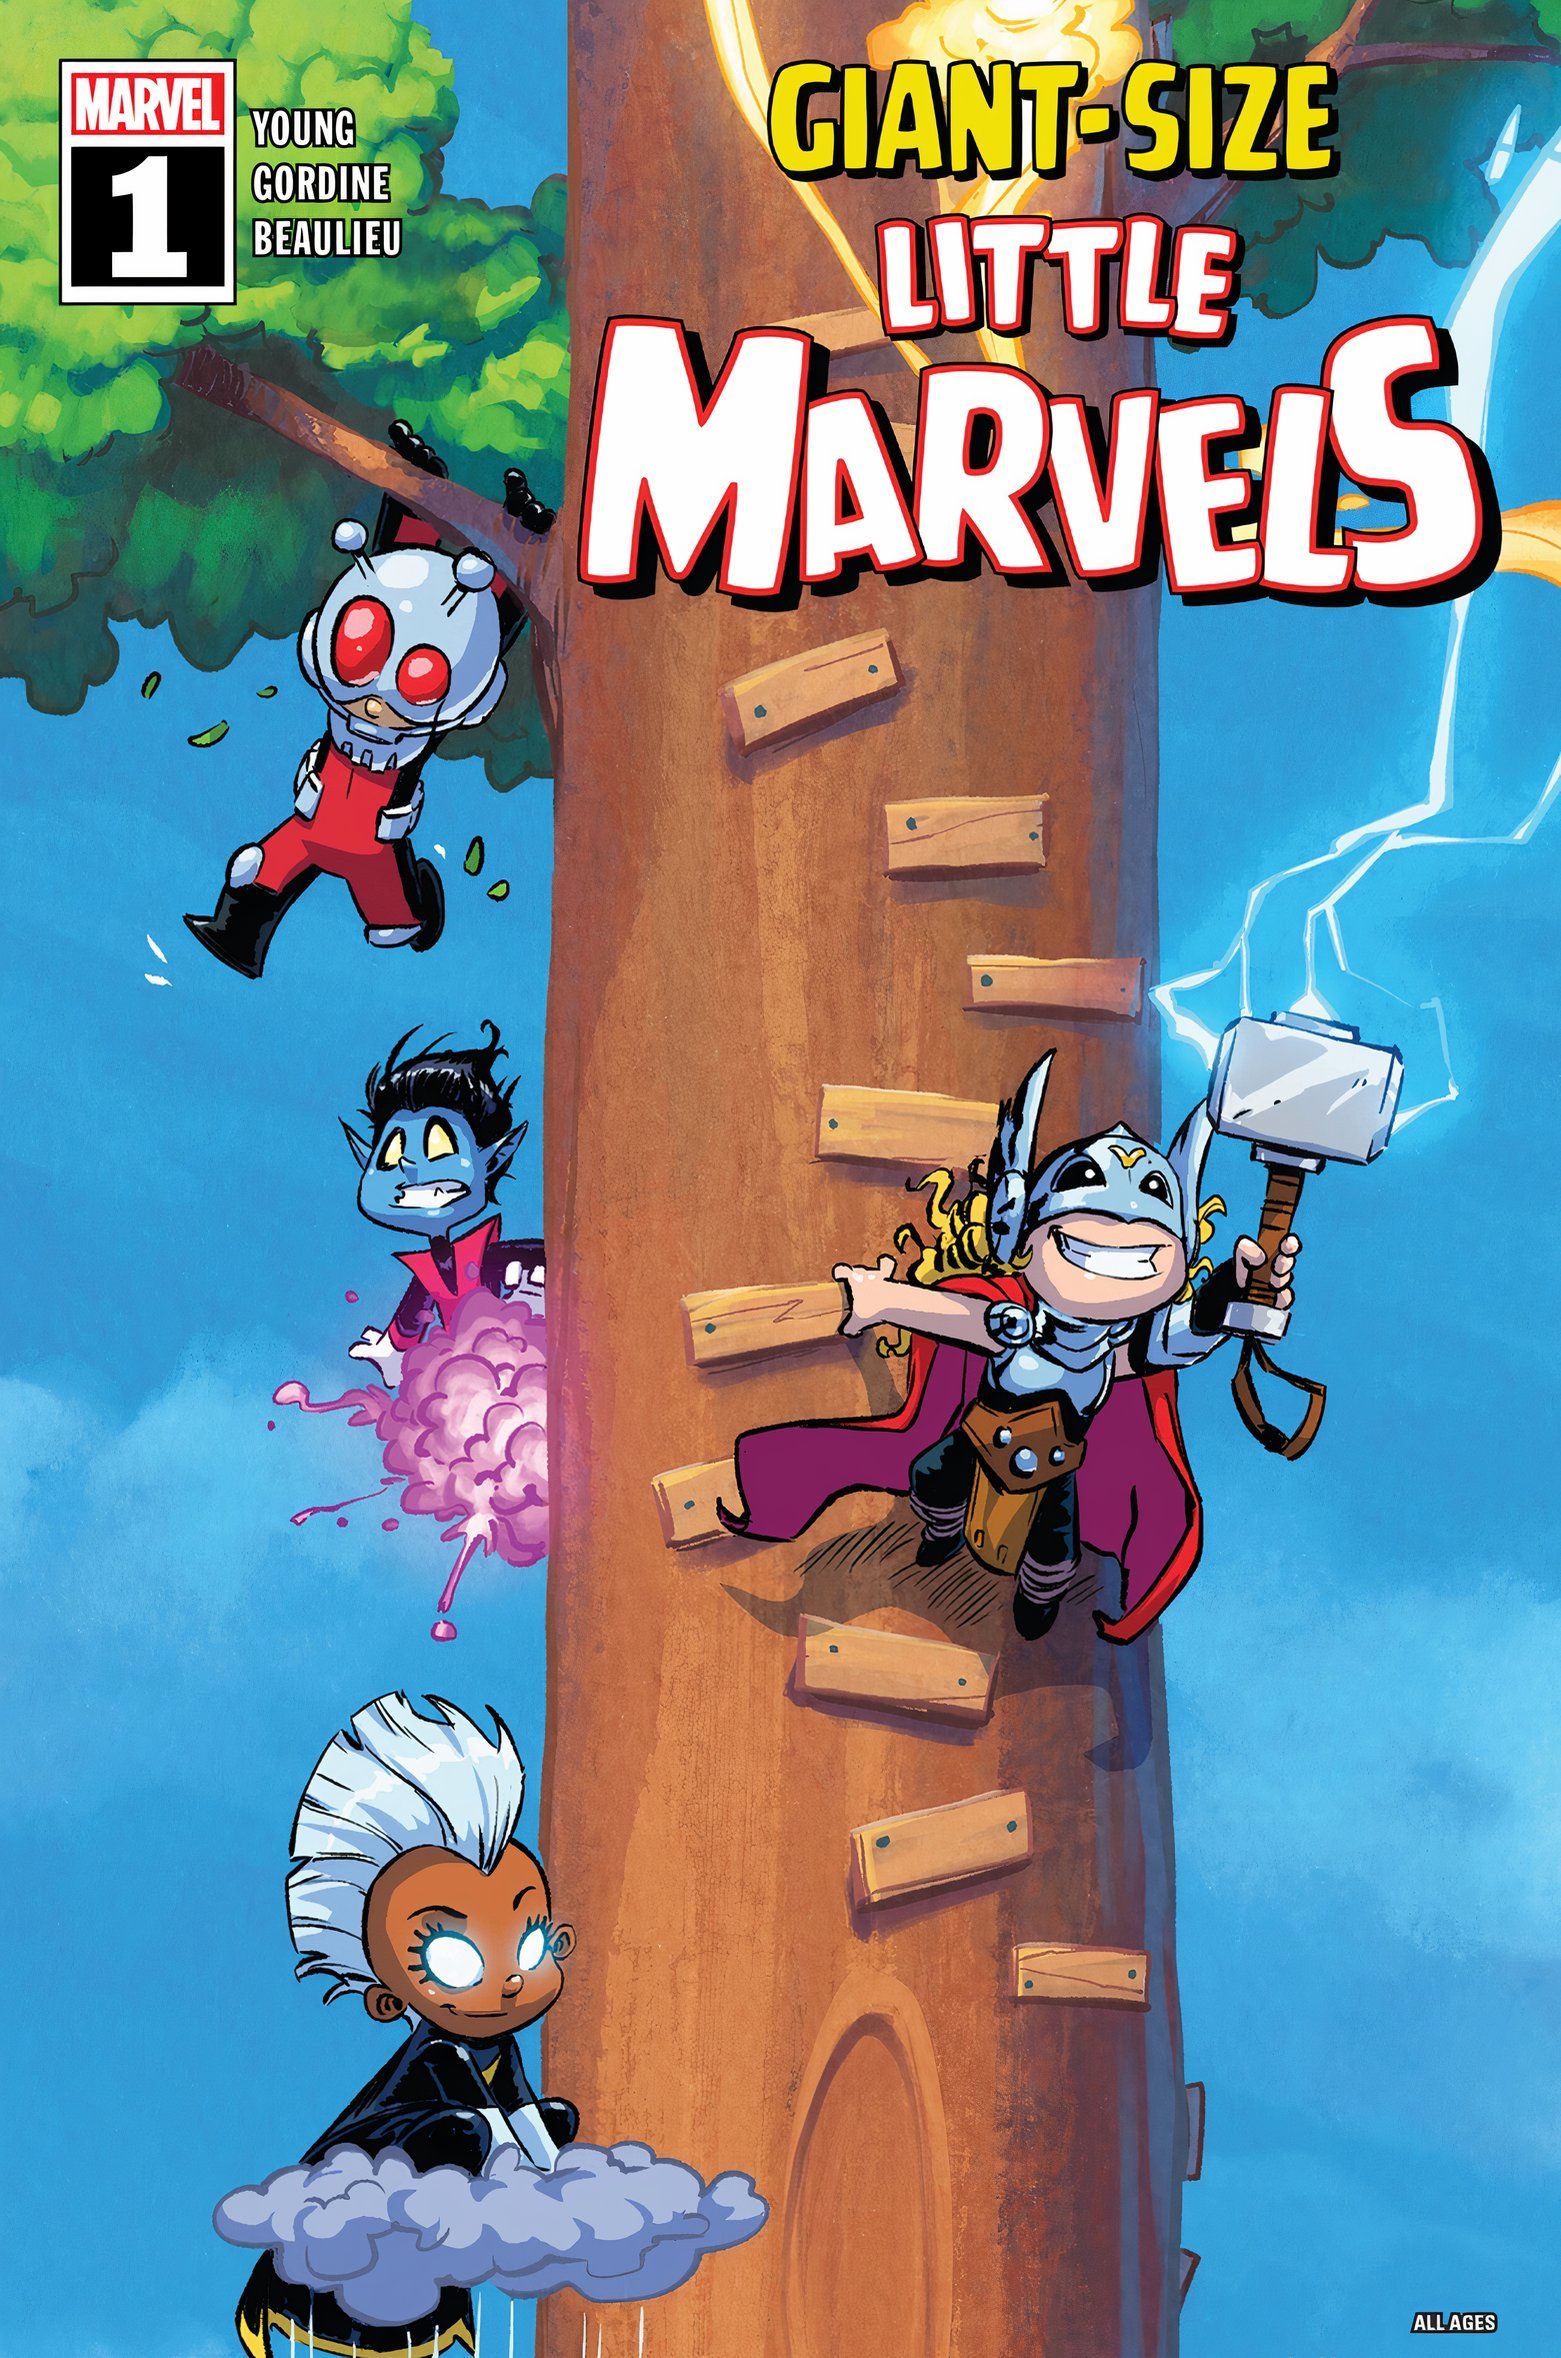 Giant-Size Little Marvels #1 cover, featuring Thor, Storm, Nightcrawler, and Ant Man, climbing to a treehouse.